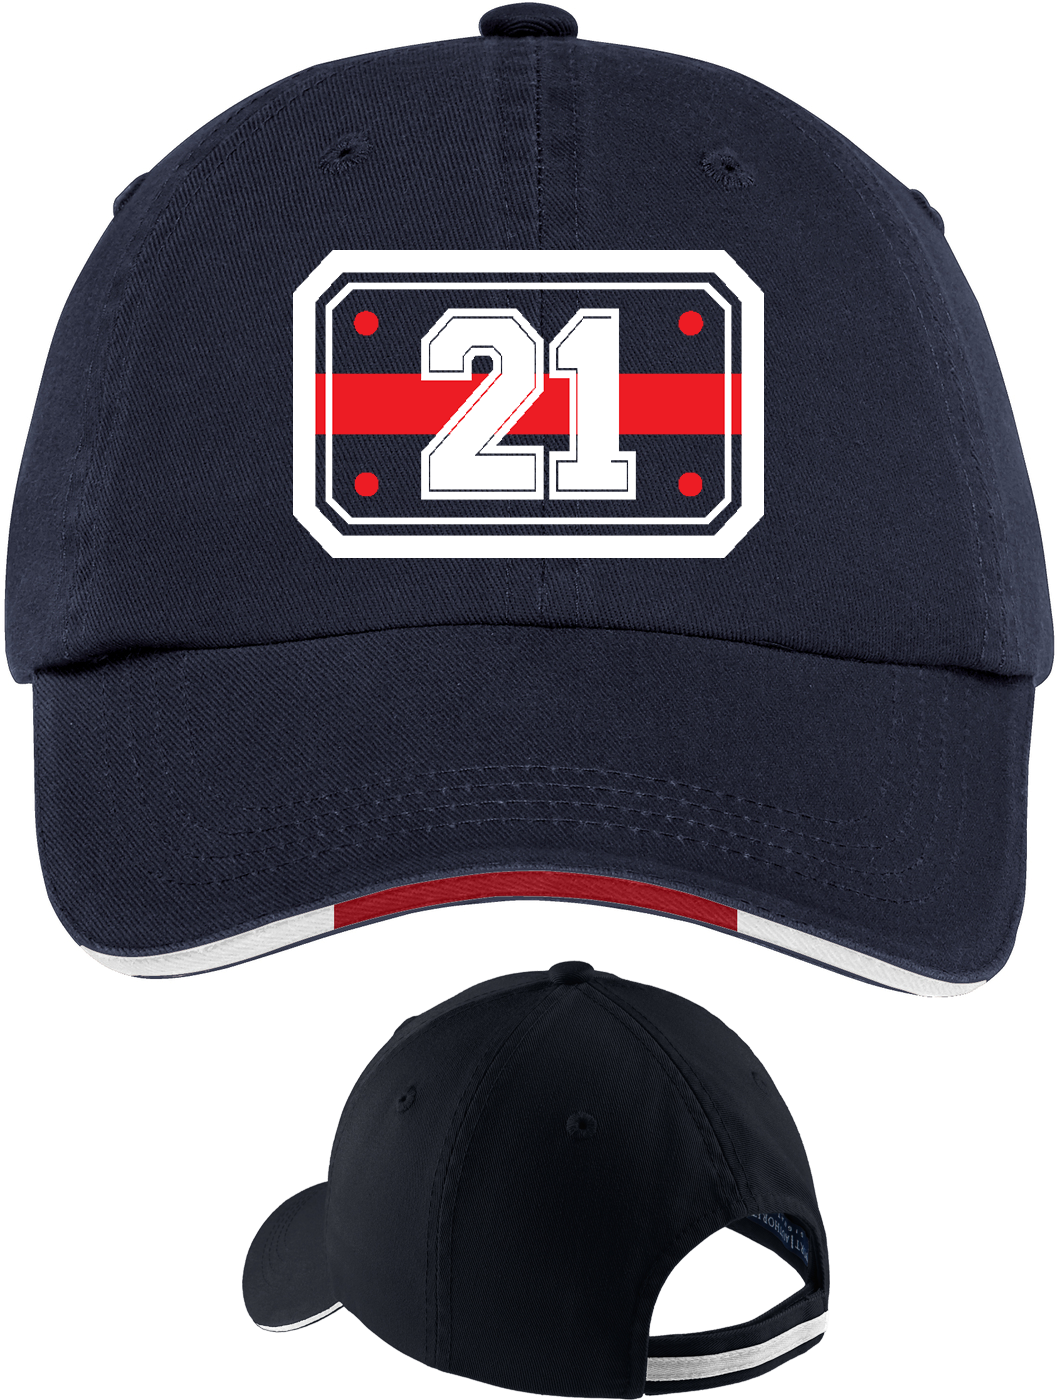 PWOH Sandwich Bill Cap with Striped Closure -CLASSIC NAVY/RED/WHITE